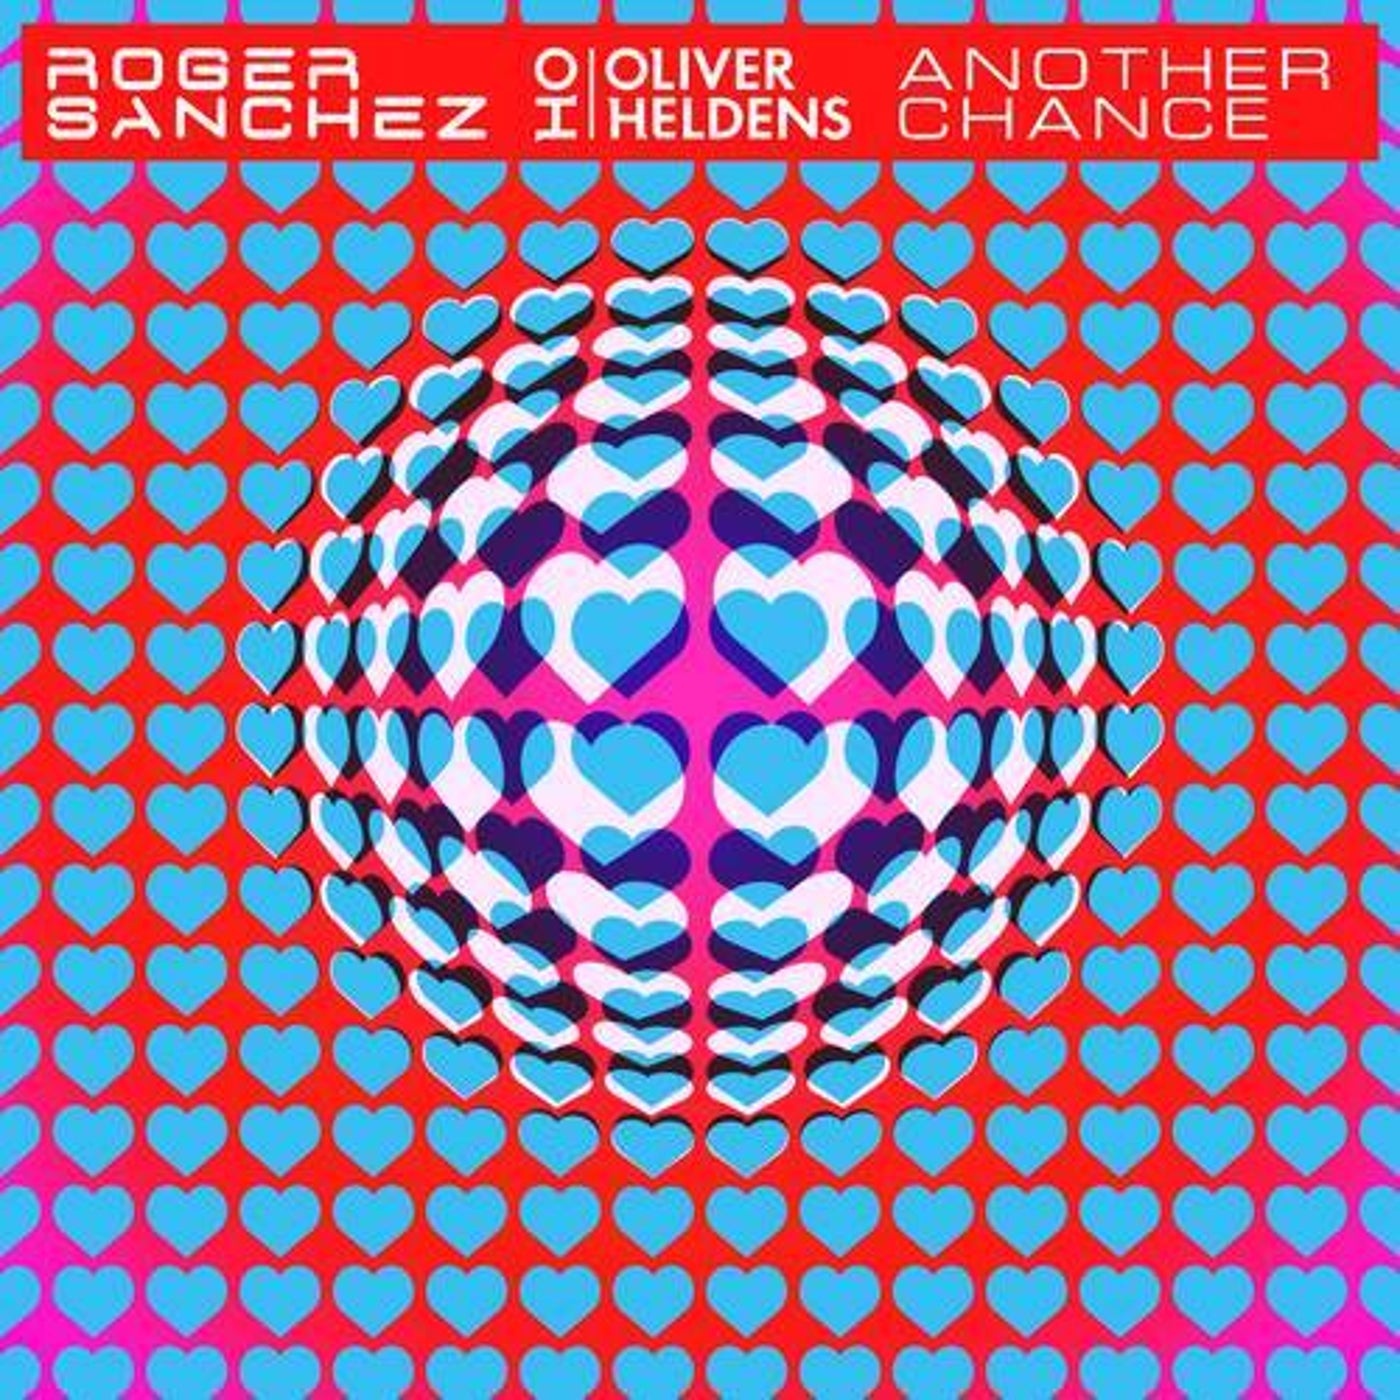 image cover: Roger Sanchez, Oliver Heldens - Another Chance (Extended) / G0100046577446